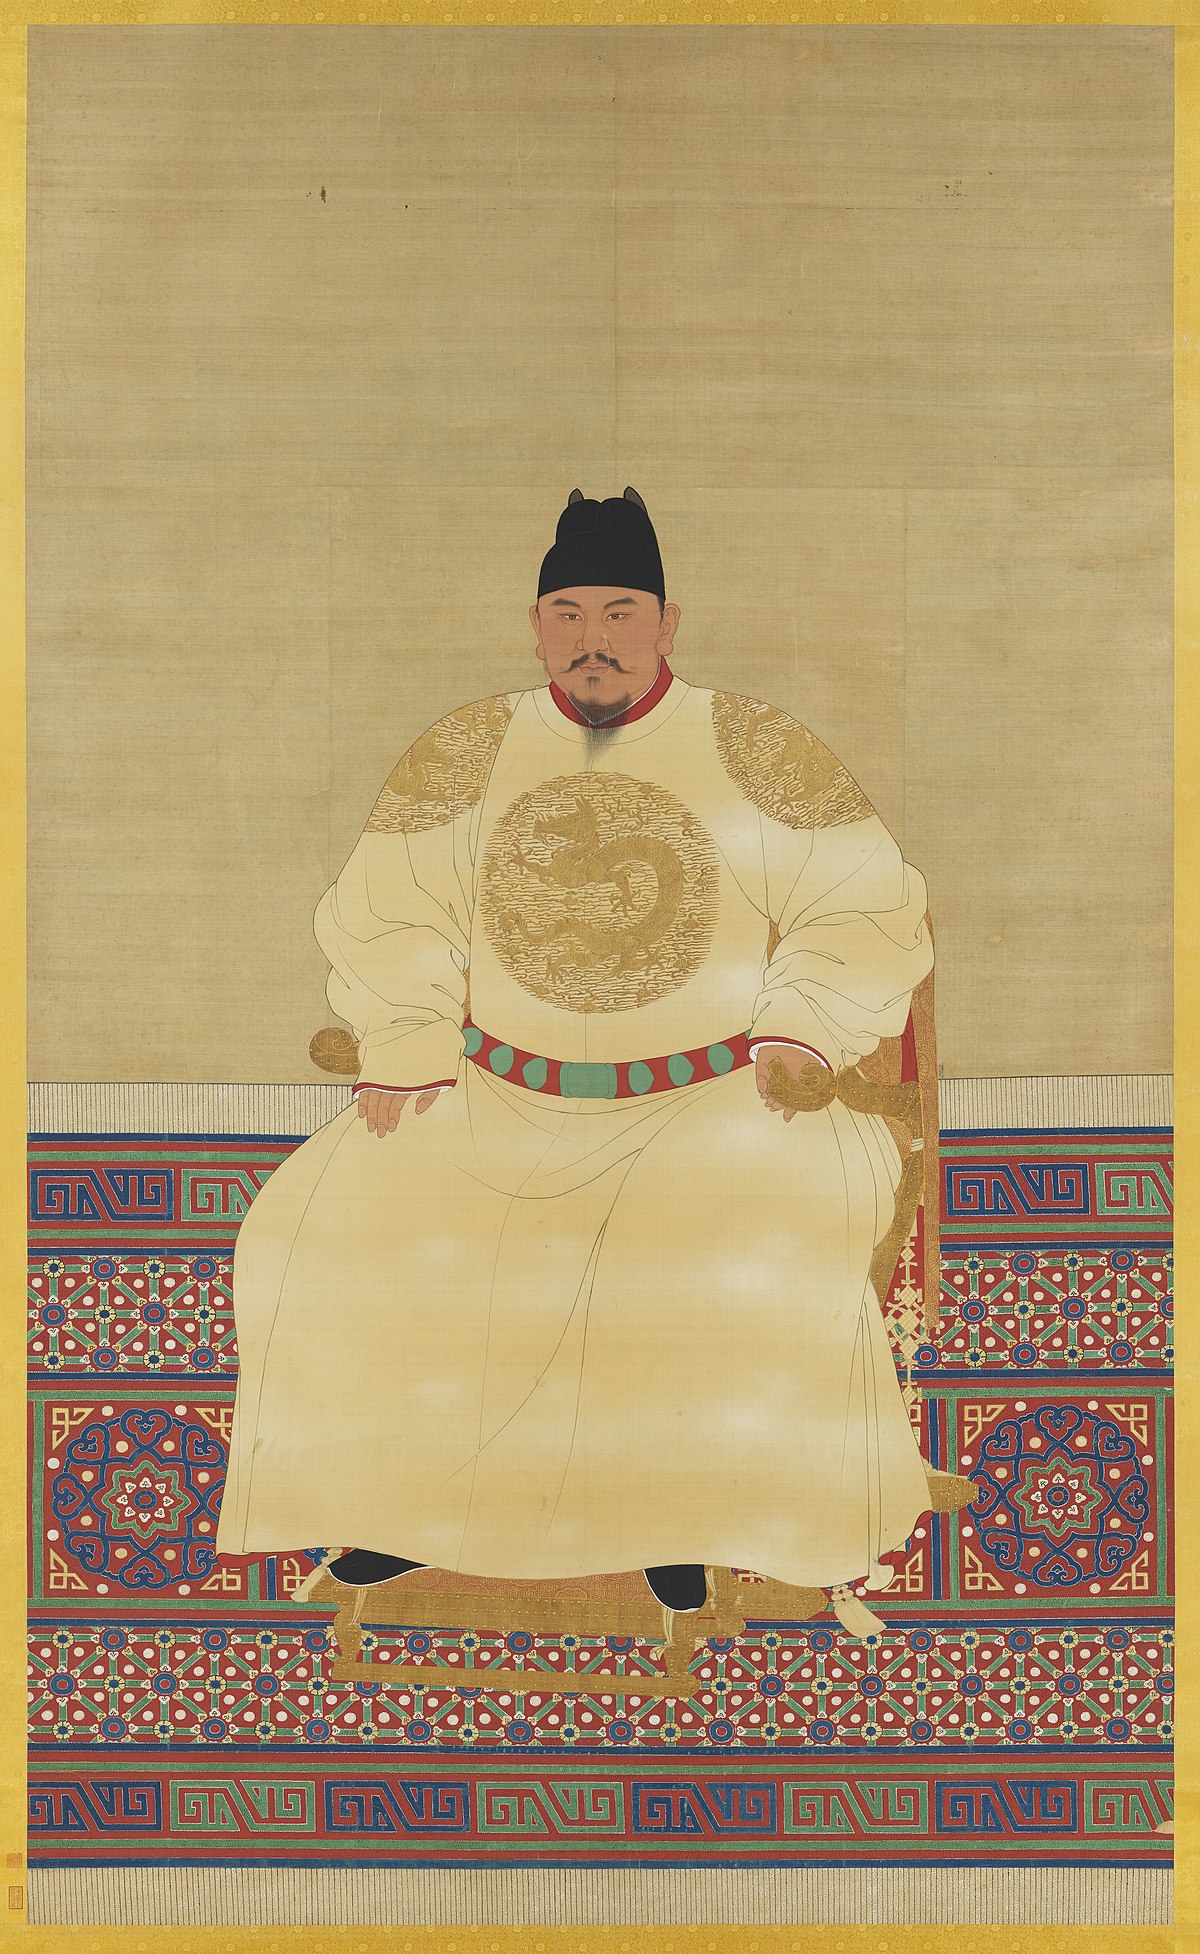 Ming Dynasty founded